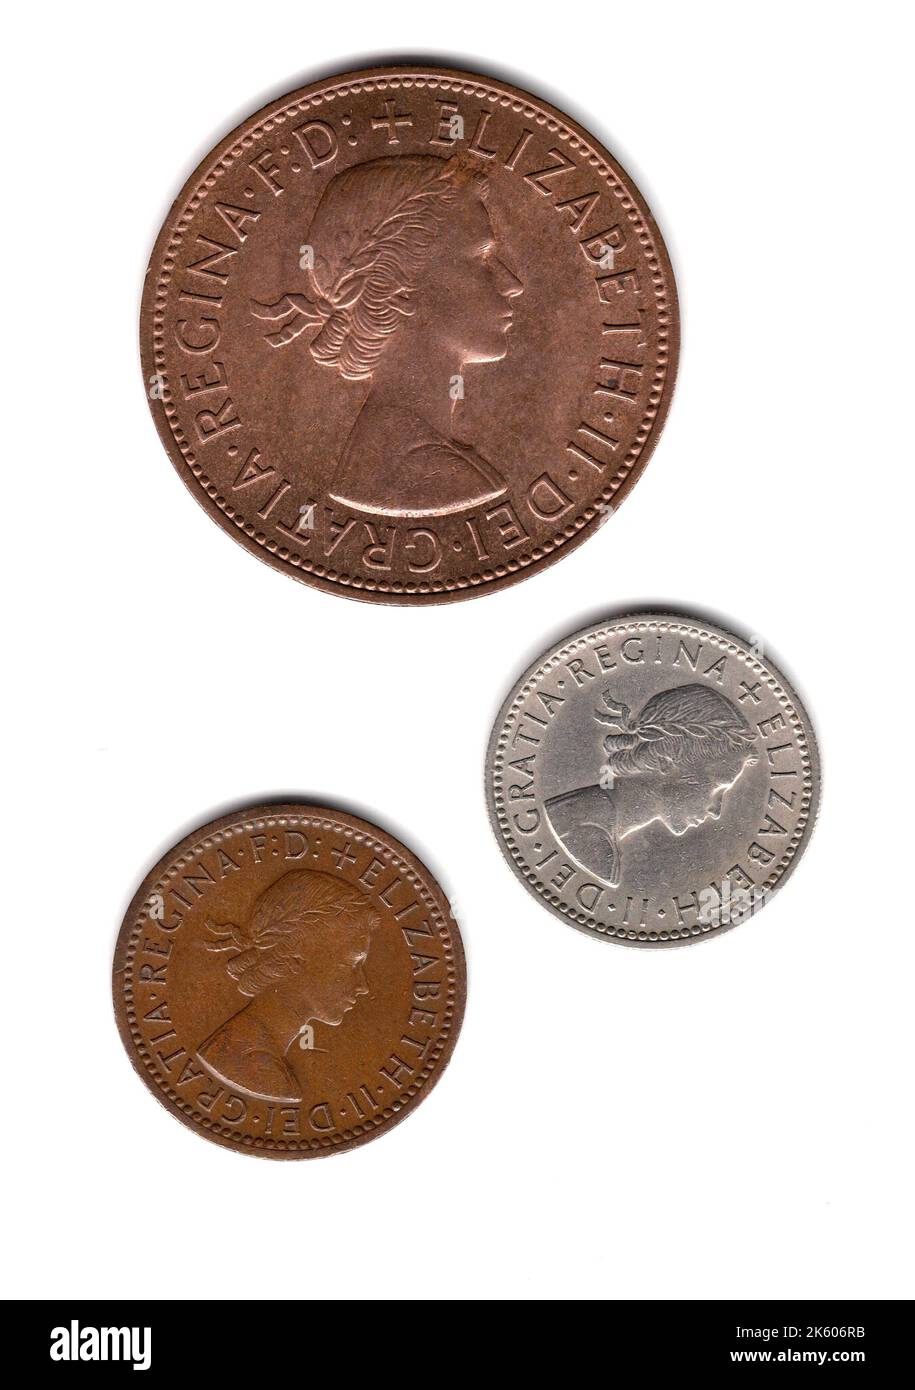 A mixture of vintage Great Britain coins featuring Queen Elizabeth II. Stock Photo